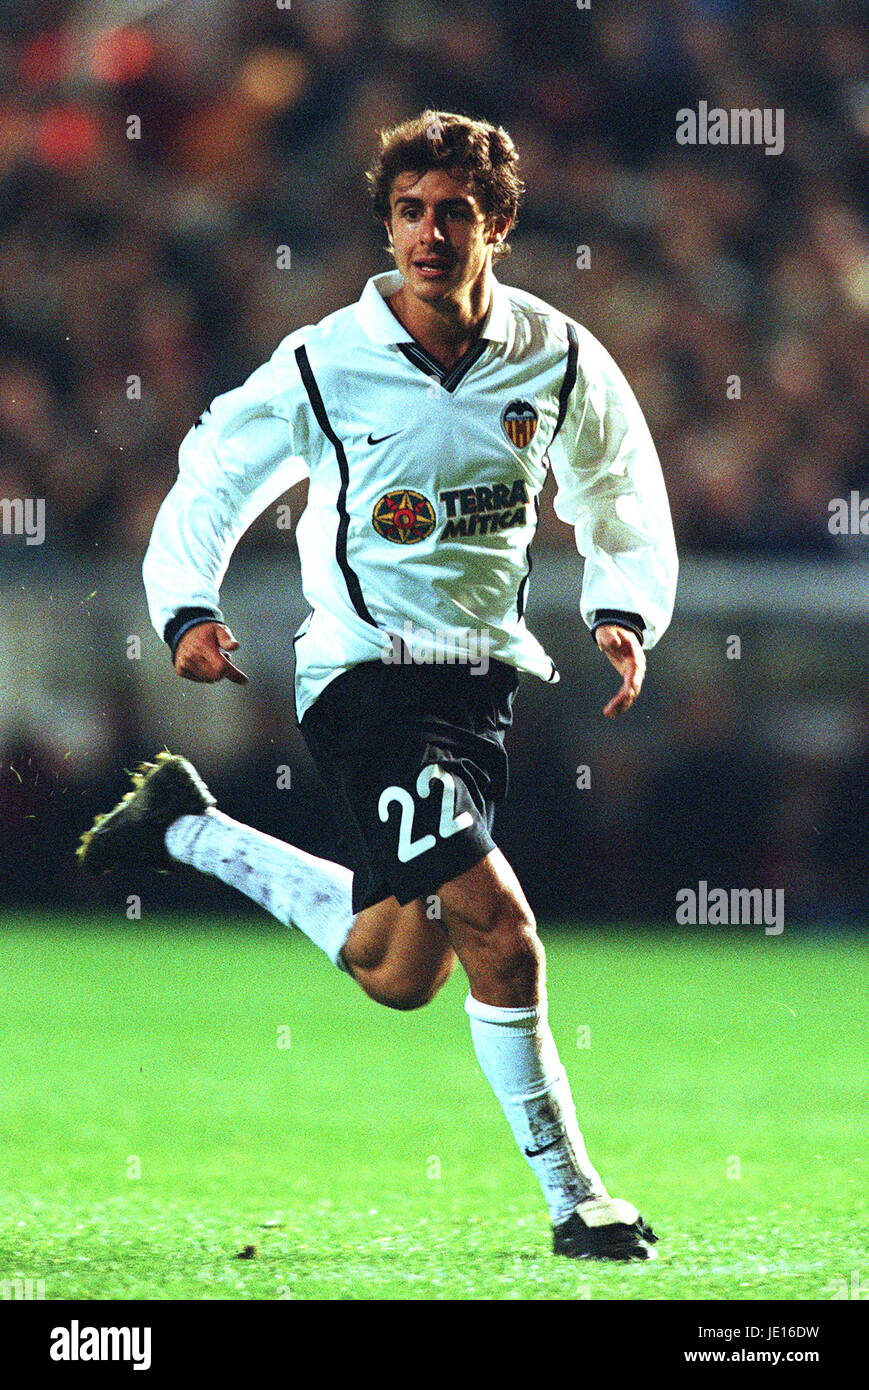 Pablo aimar 2001 hi-res stock photography and images - Alamy